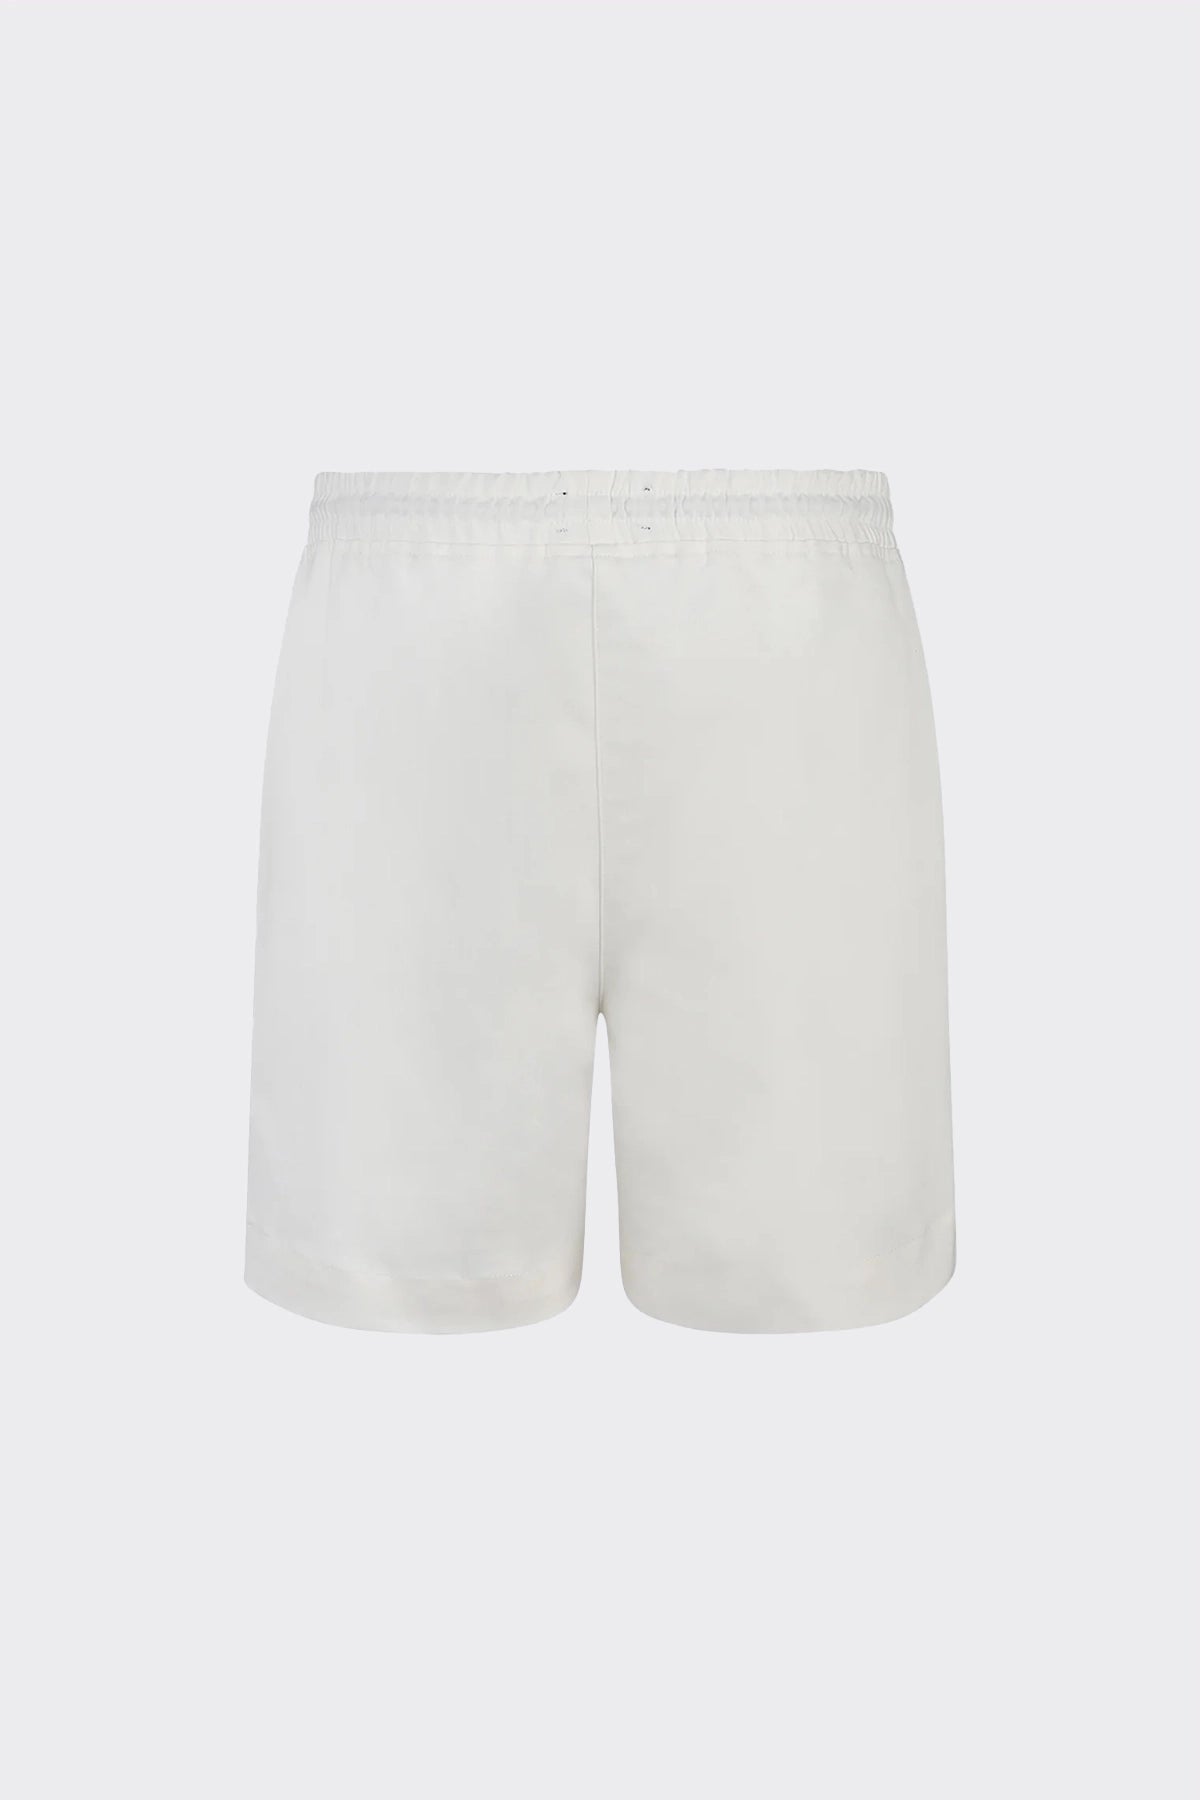 CLYDE SHORT | WHITE PATCH